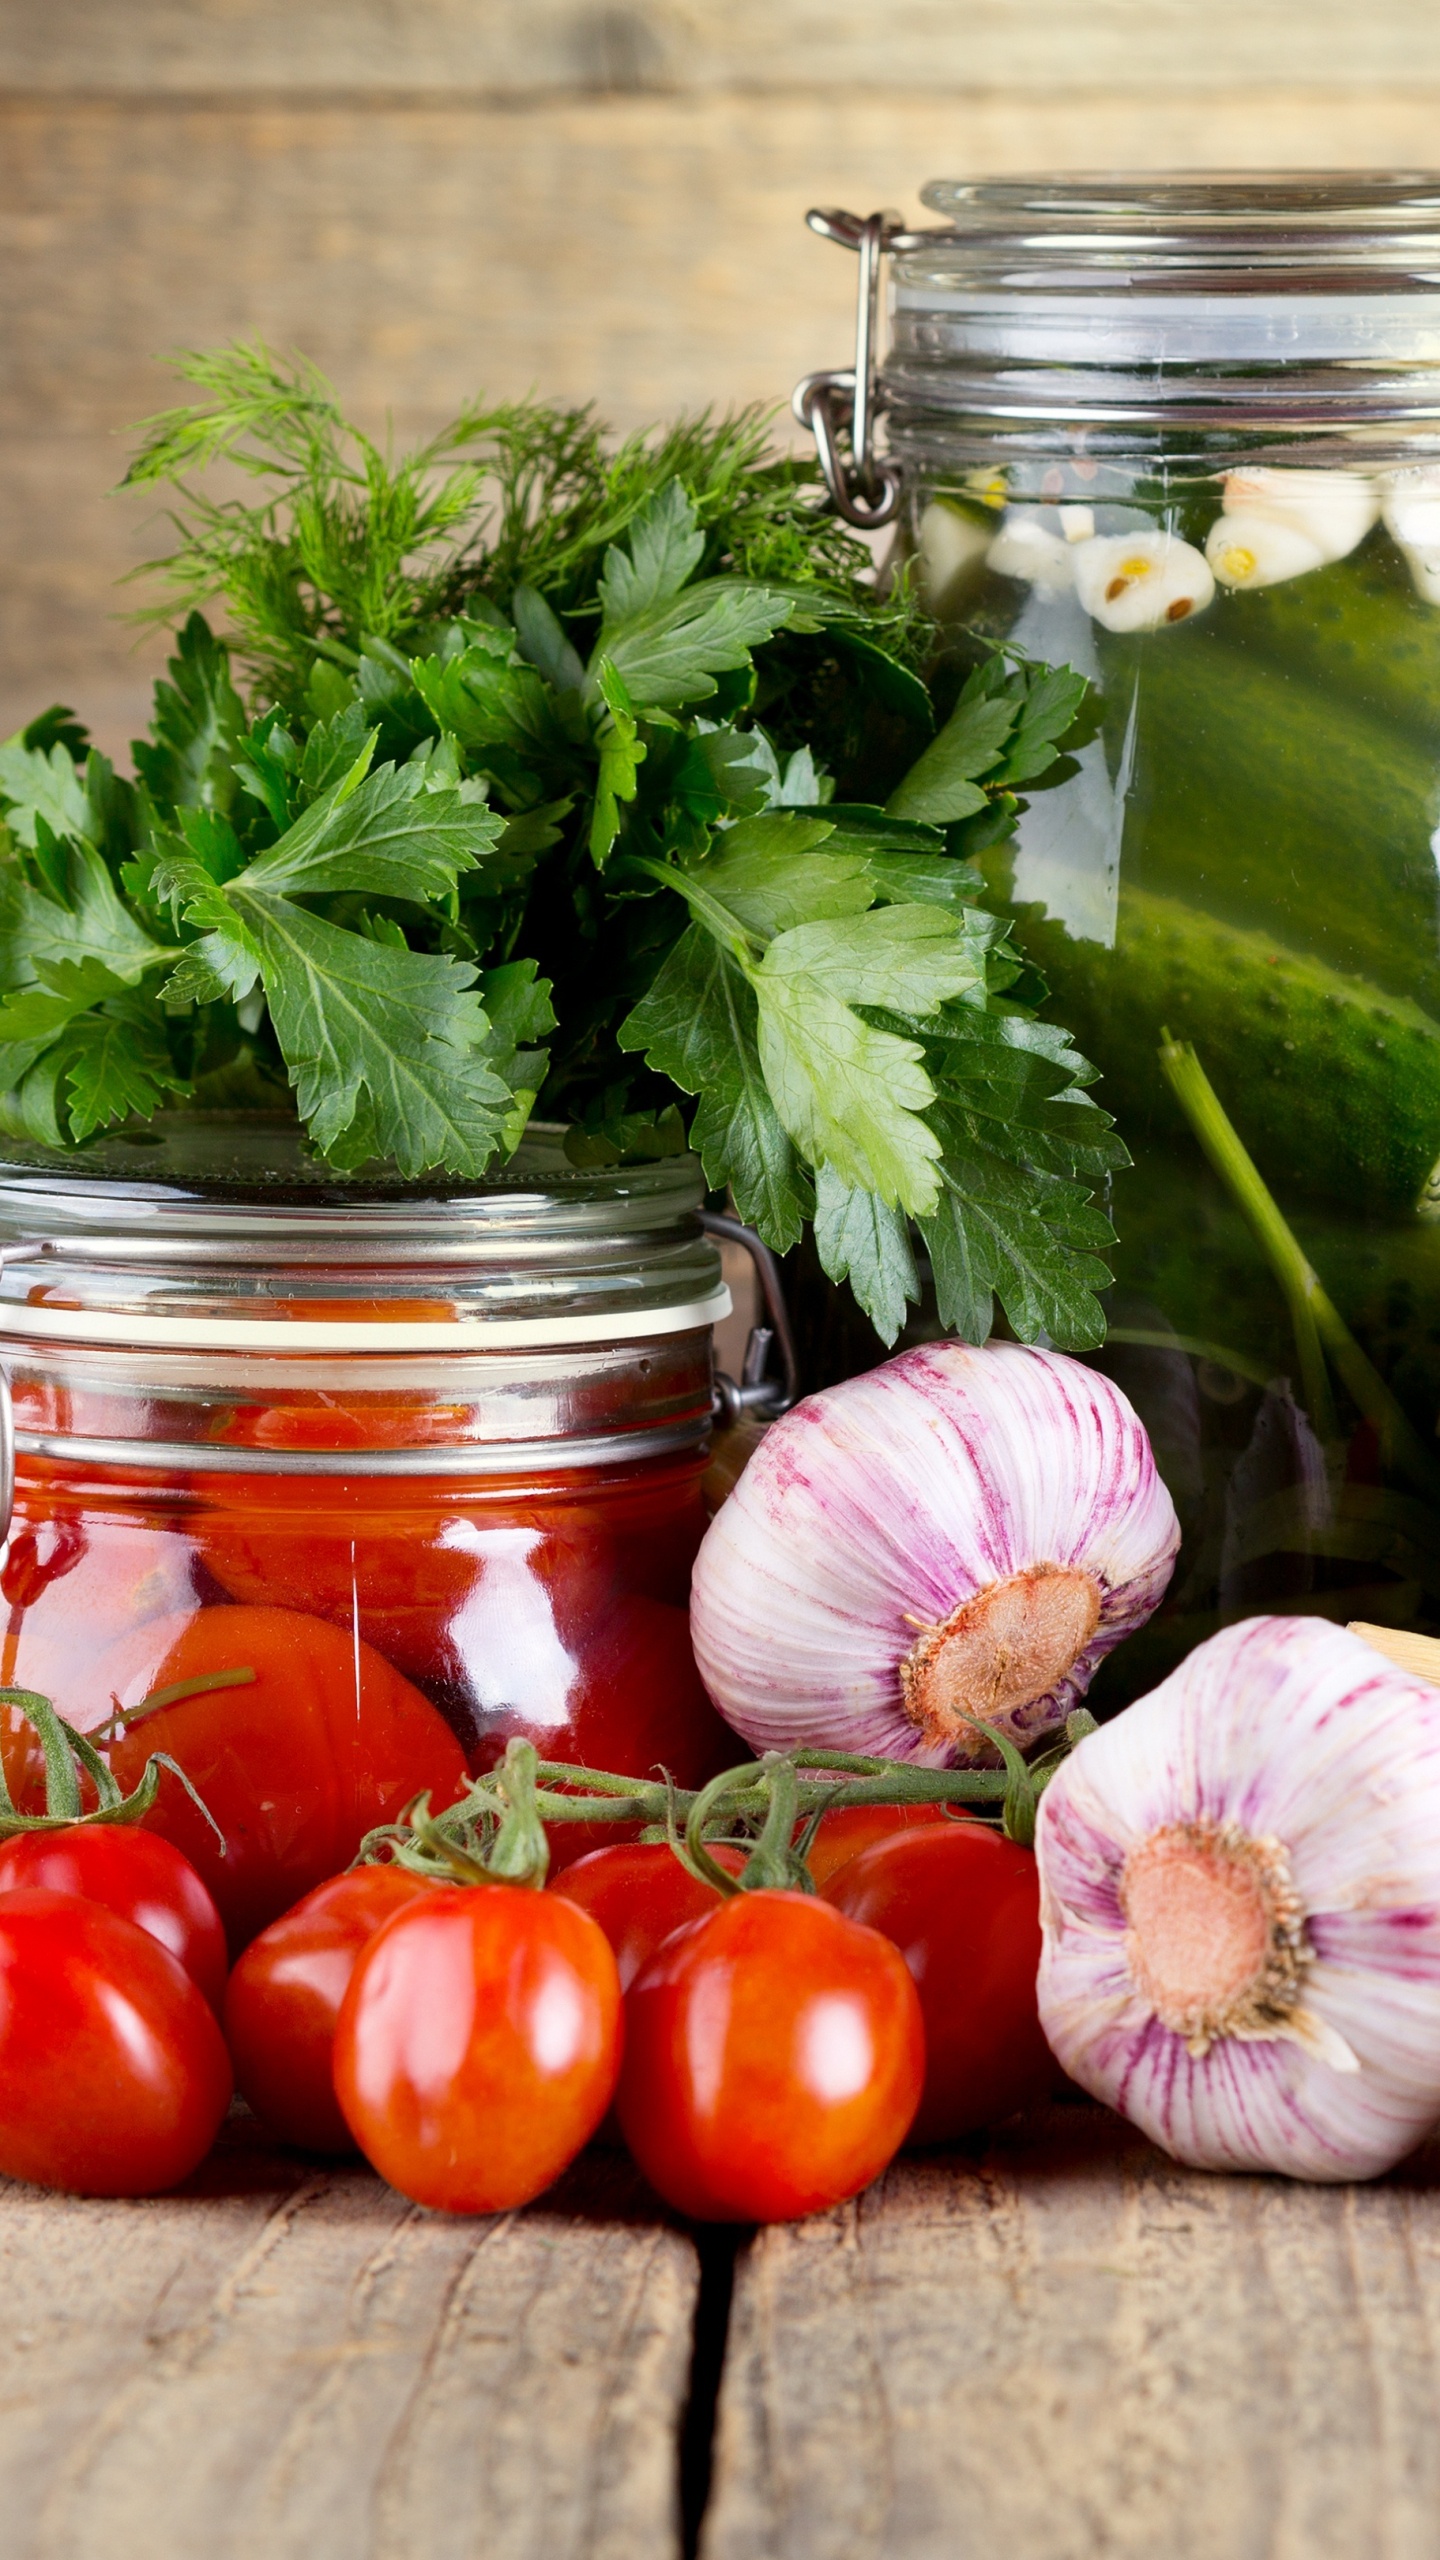 Red Tomatoes and Green Leaves in Clear Glass Jar. Wallpaper in 1440x2560 Resolution